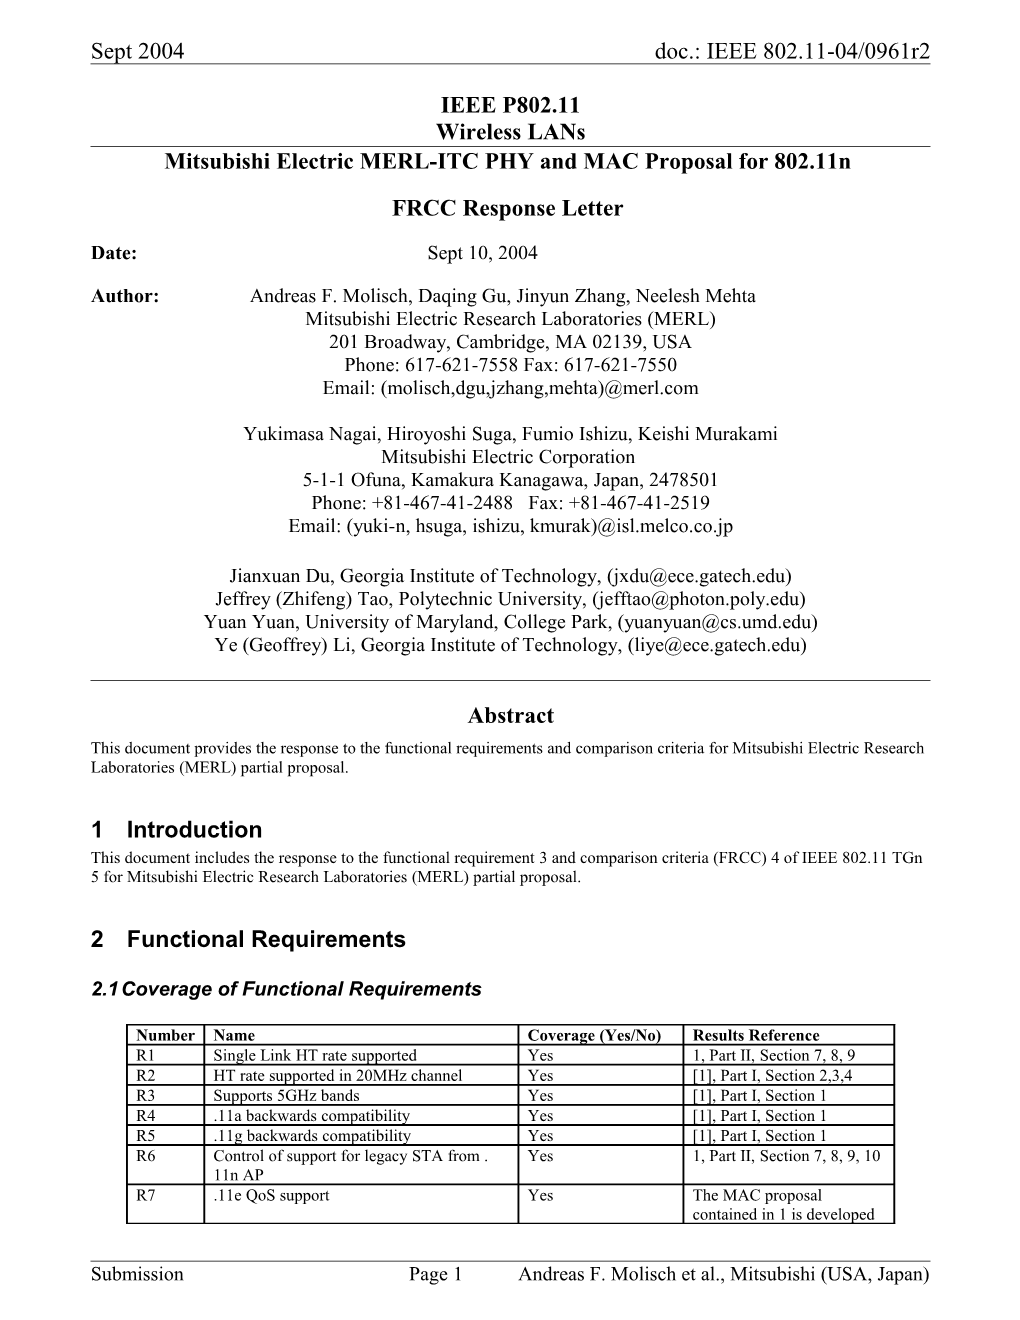 Mitsubishi Electric MERL-ITC PHY and MAC Proposal for 802.11N